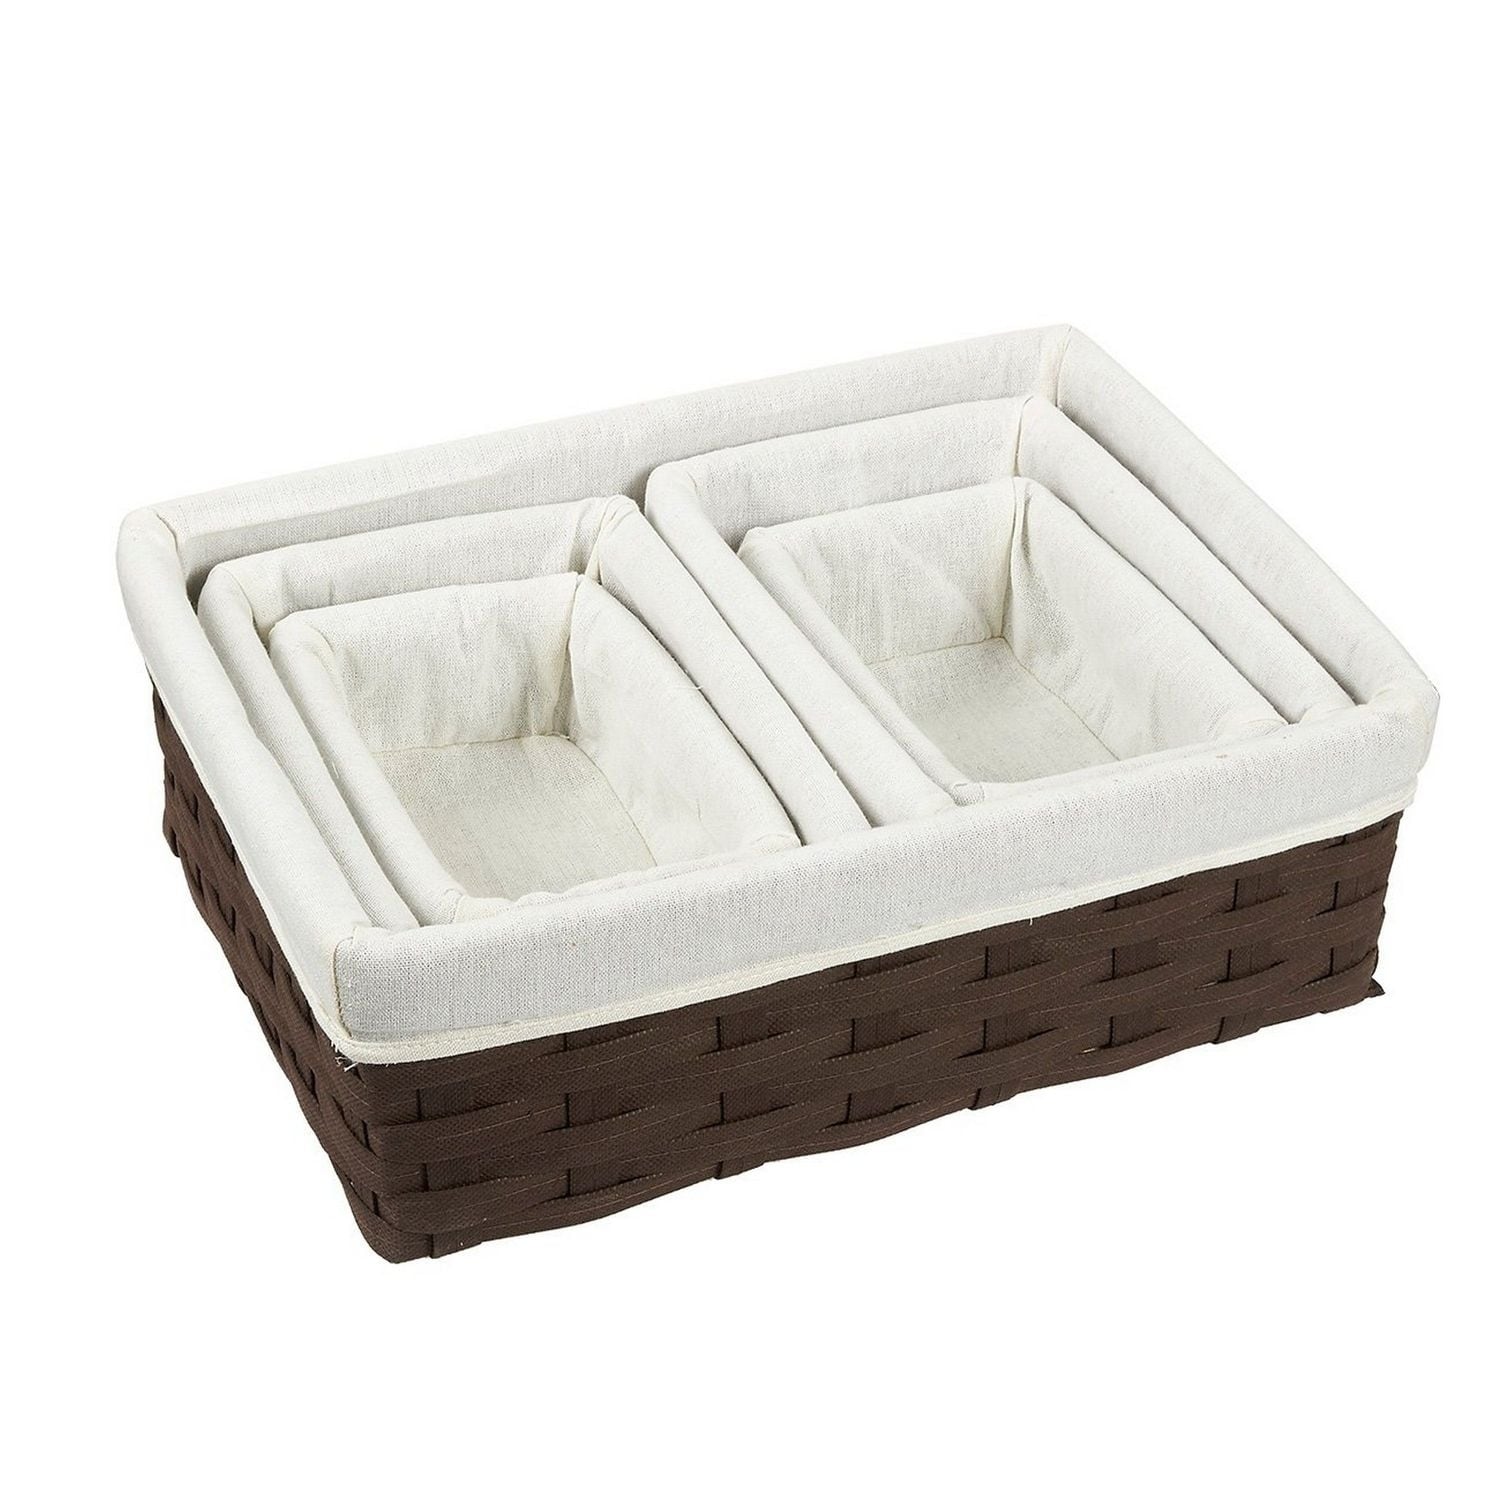 https://ak1.ostkcdn.com/images/products/29867374/Juvale-Wicker-Basket-Storage-Baskets-for-Shelves-with-Woven-Liner-5-Pack-999e2155-64f4-4a8d-a297-589d27811edc.jpg